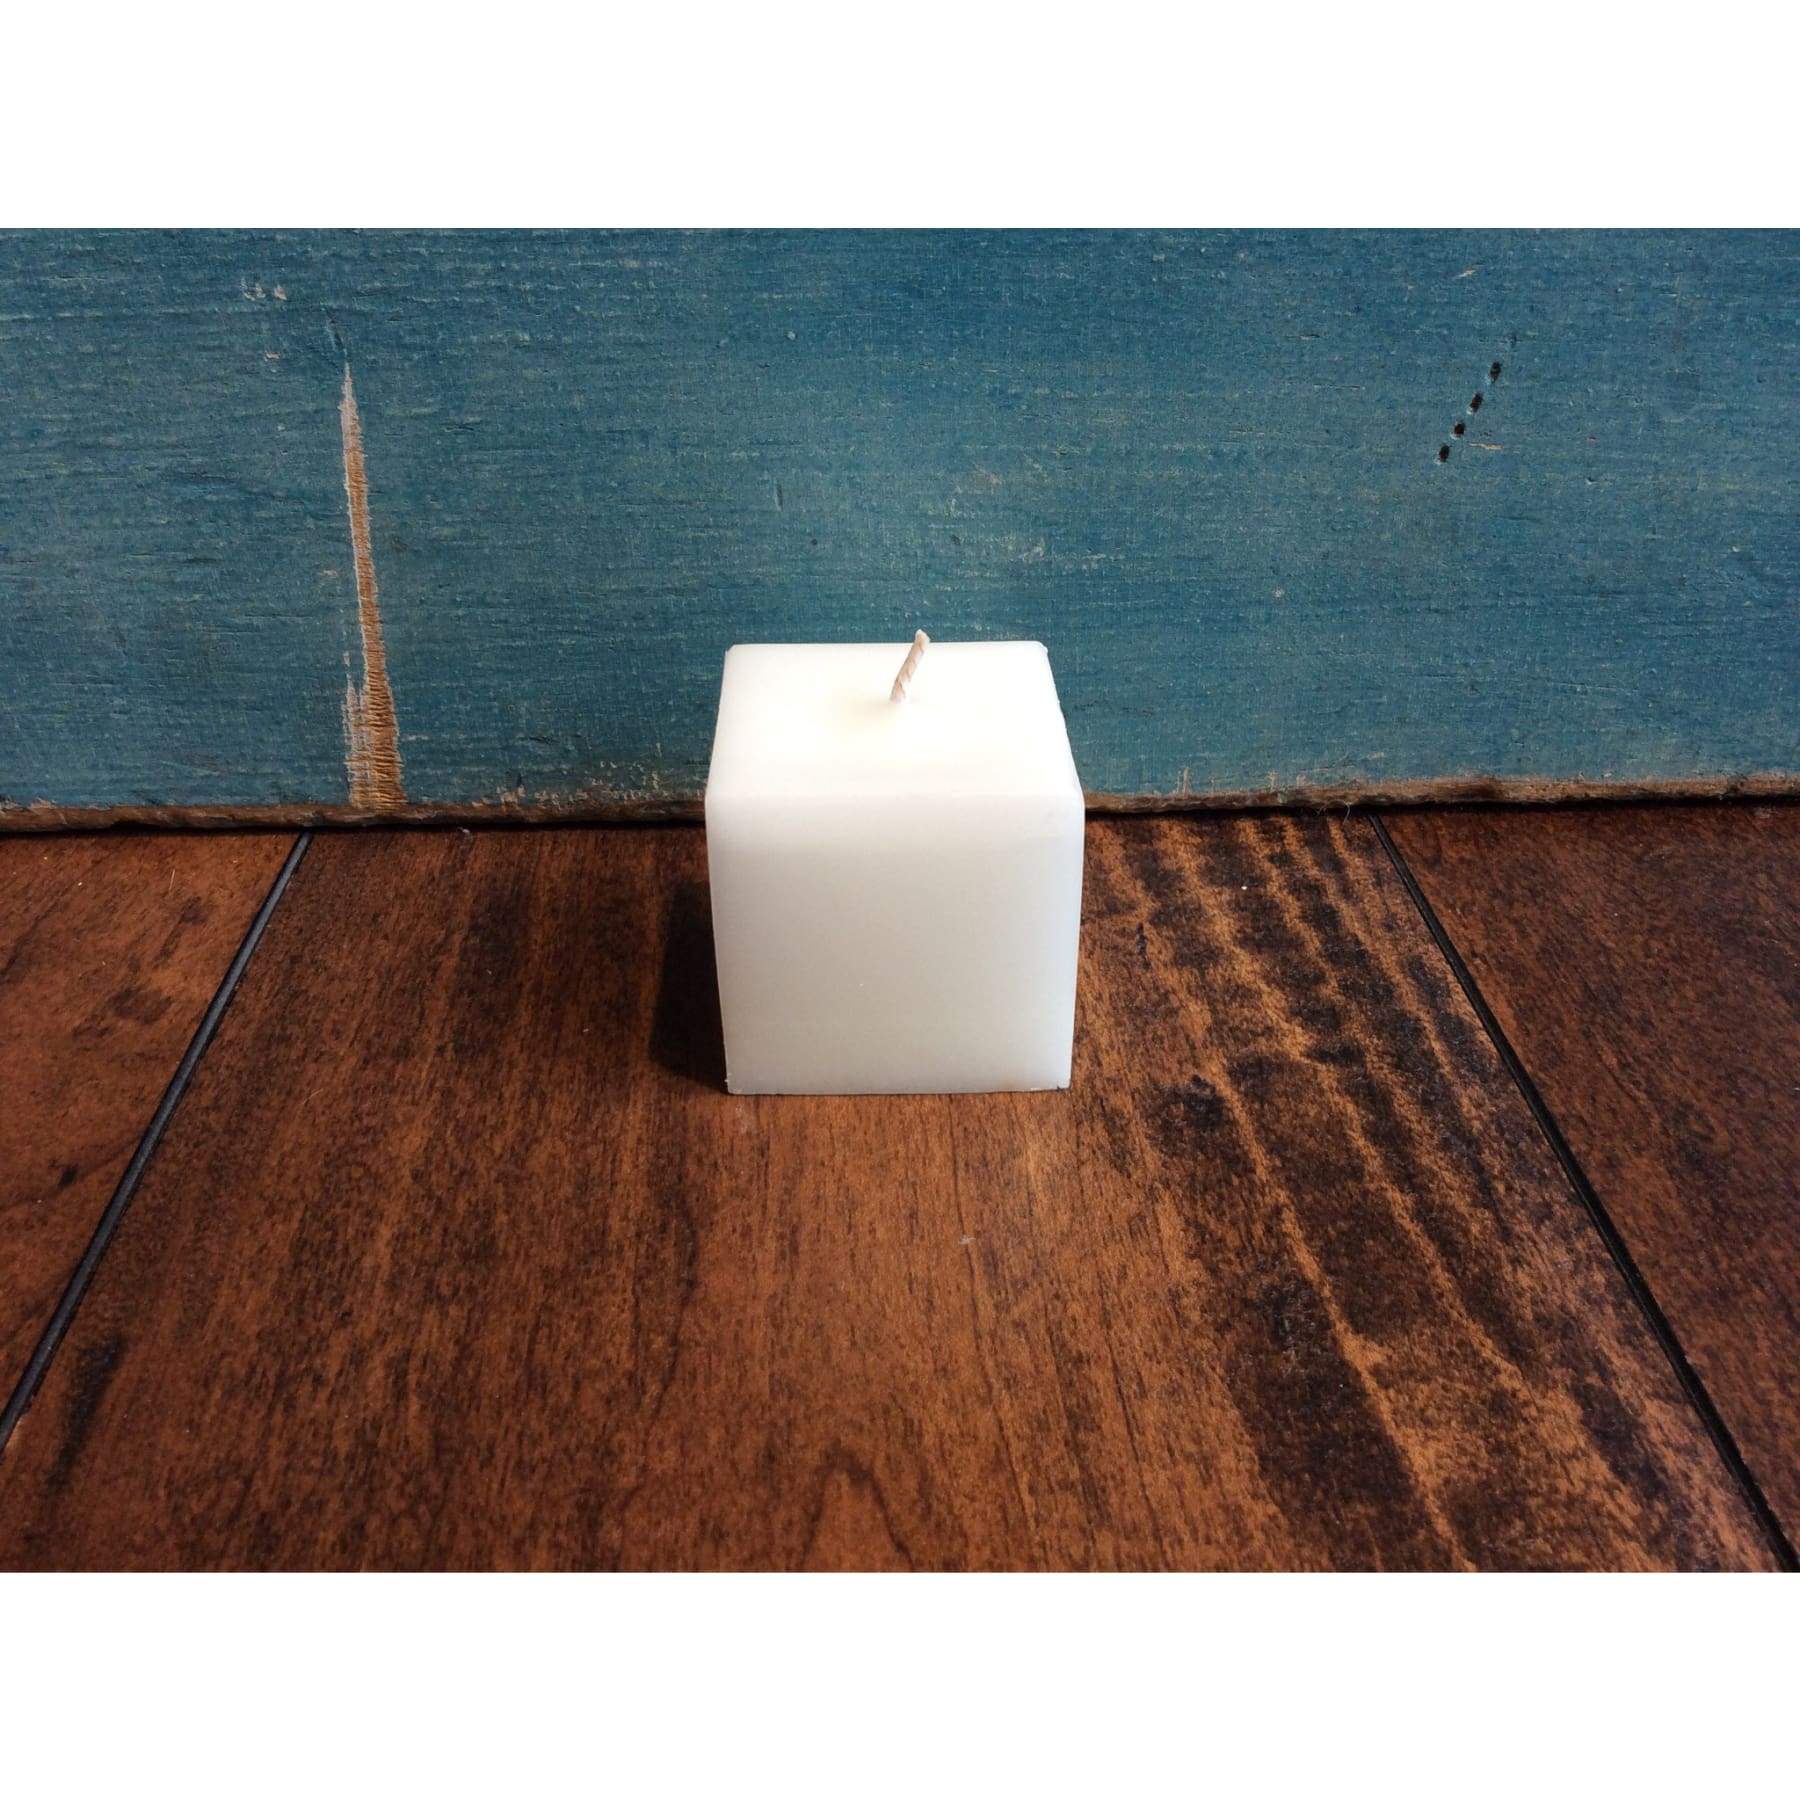 Texas General Square Candles - Sleeping on Snow